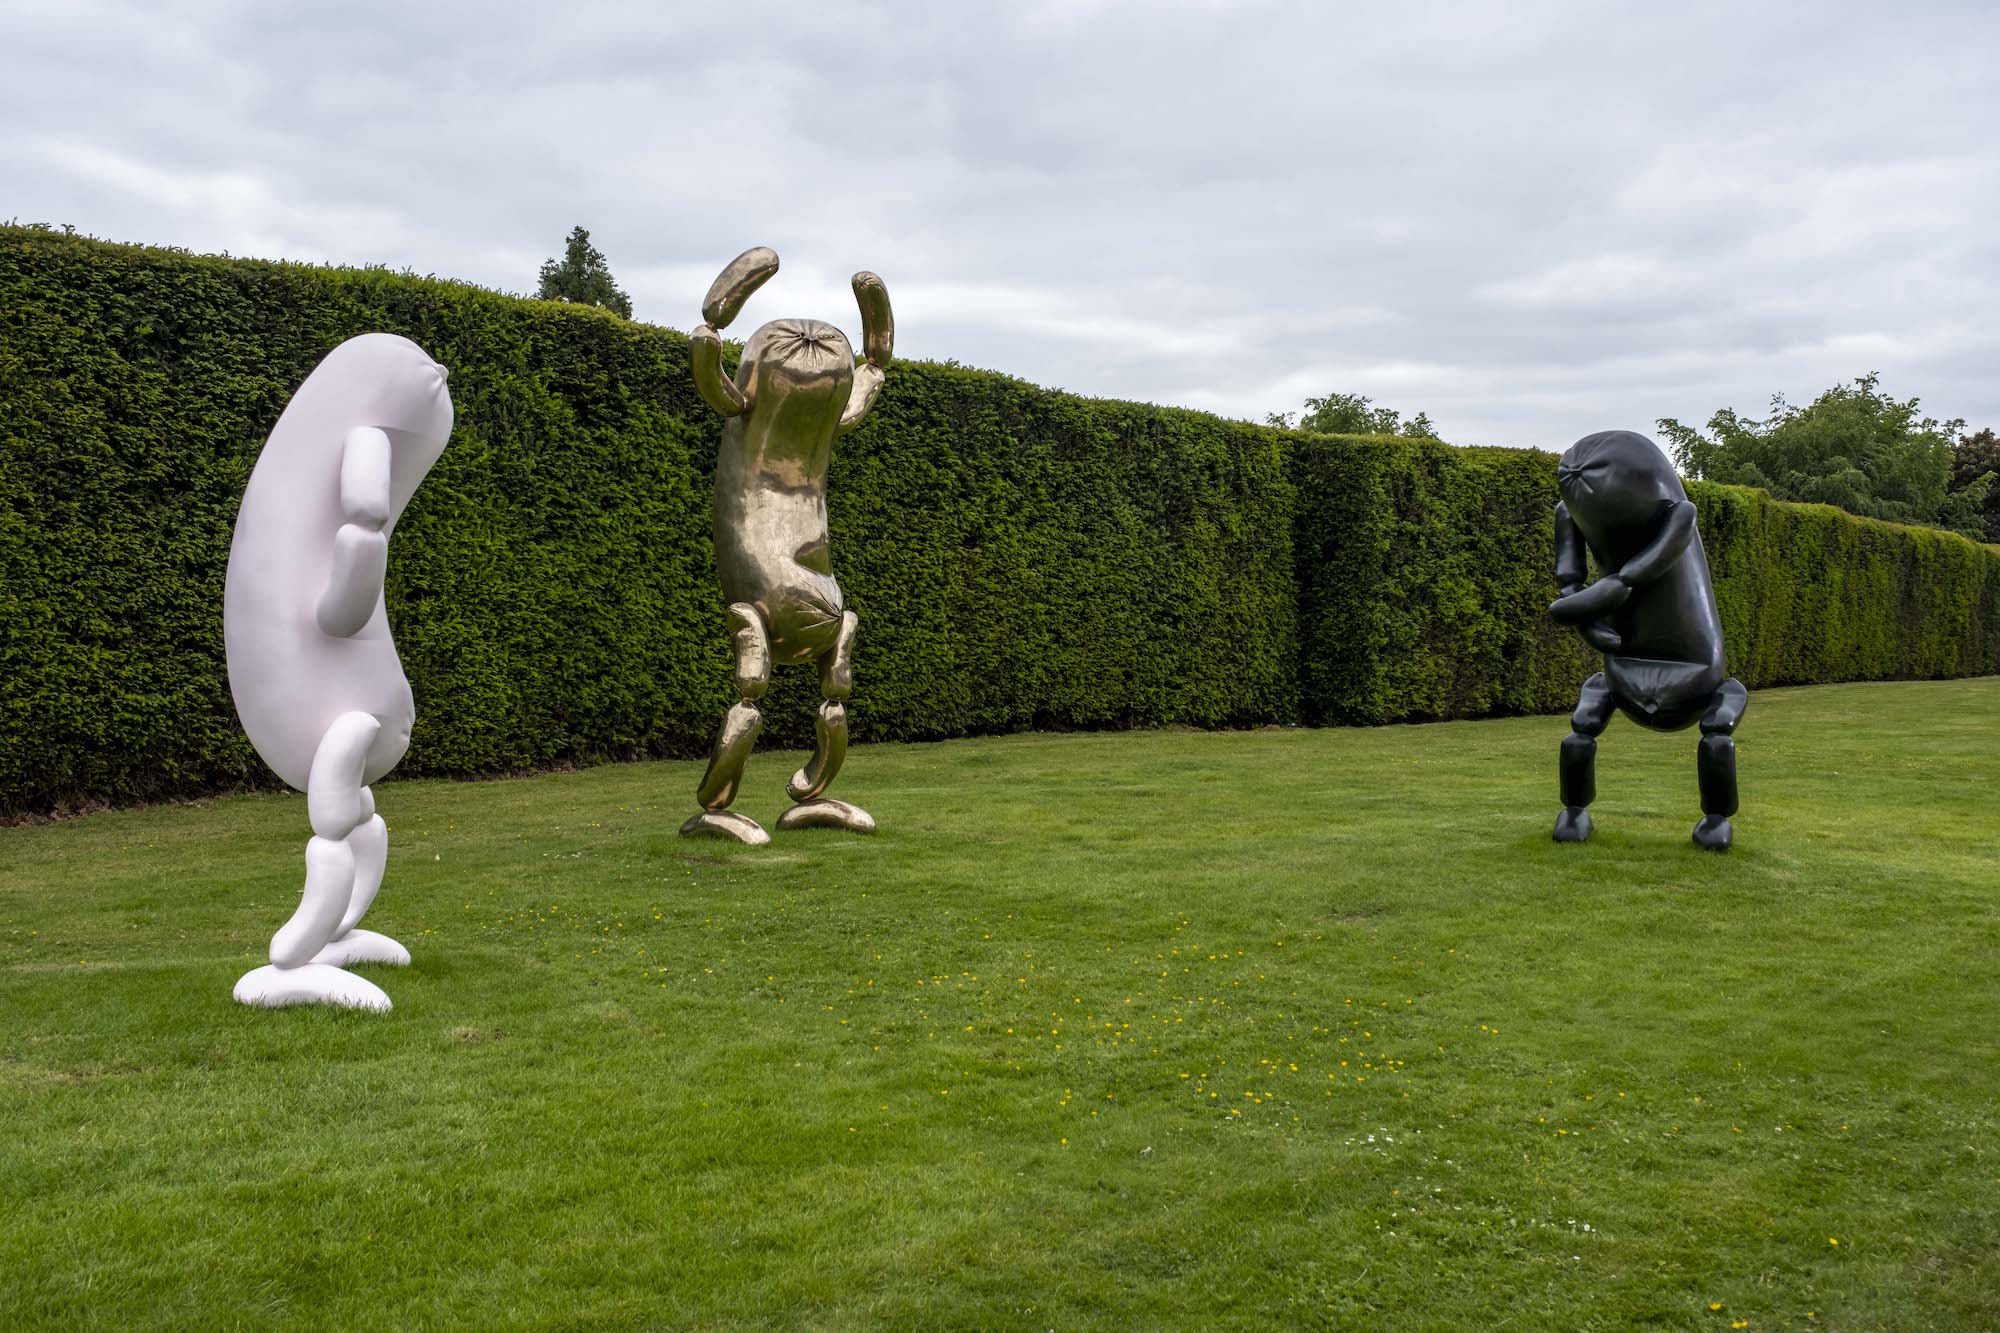 Three sausage sculptures with arms and legs that appear to dance on the lawn.